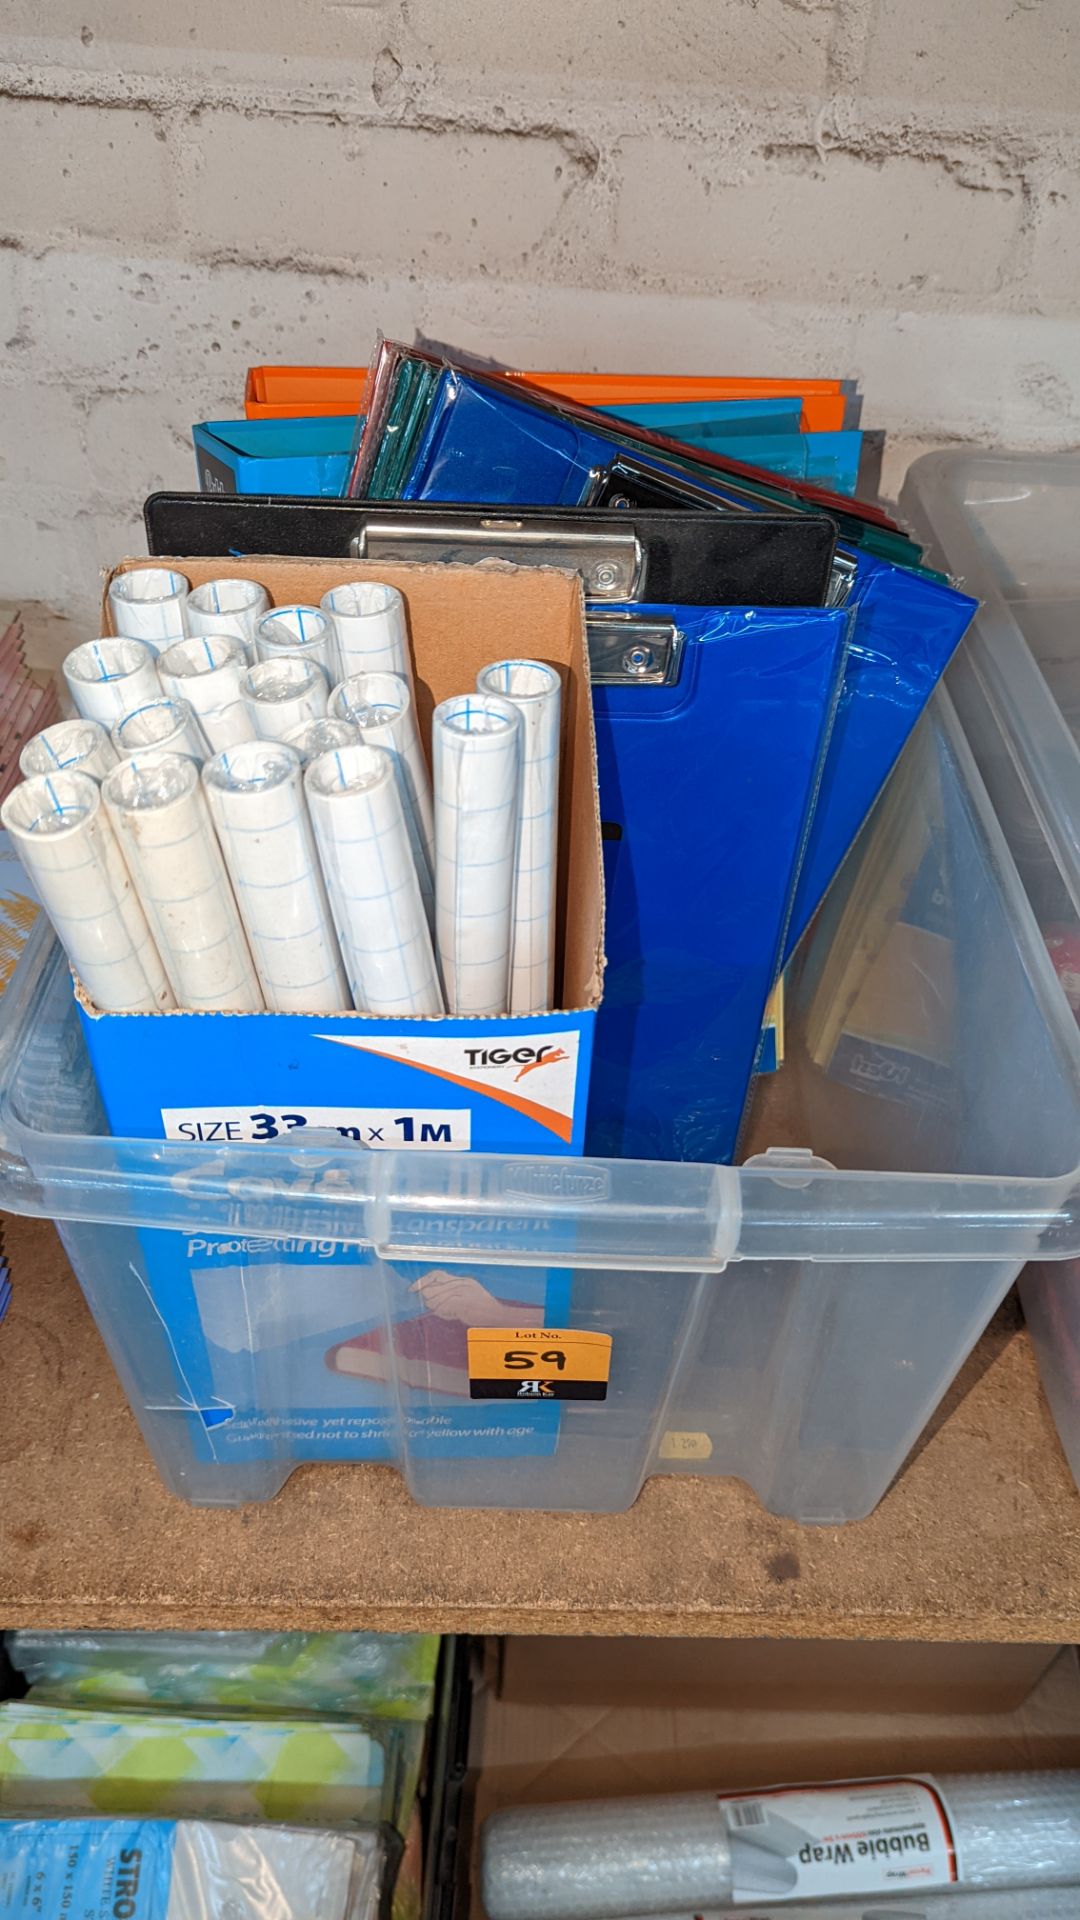 Quantity of clipboards, lever arch files, file inserts & self-adhesive cover film - crate excluded